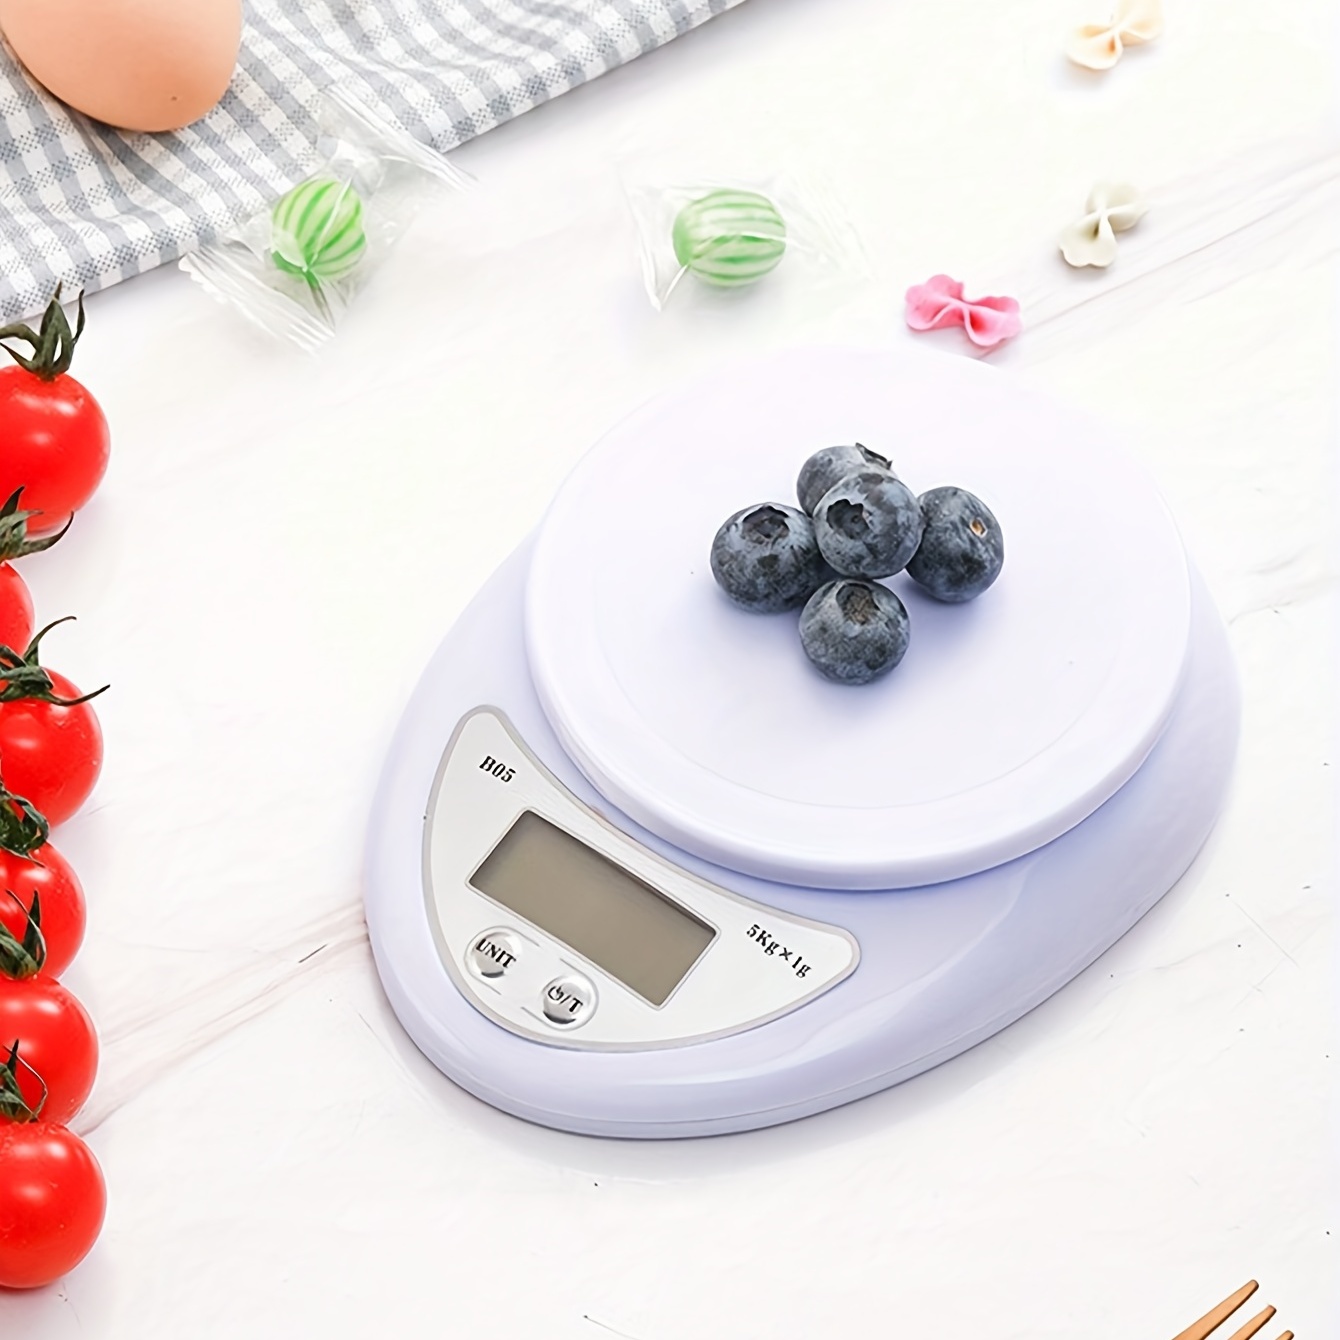 Household small scale 1 small kitchen weighing scale kitchen scale